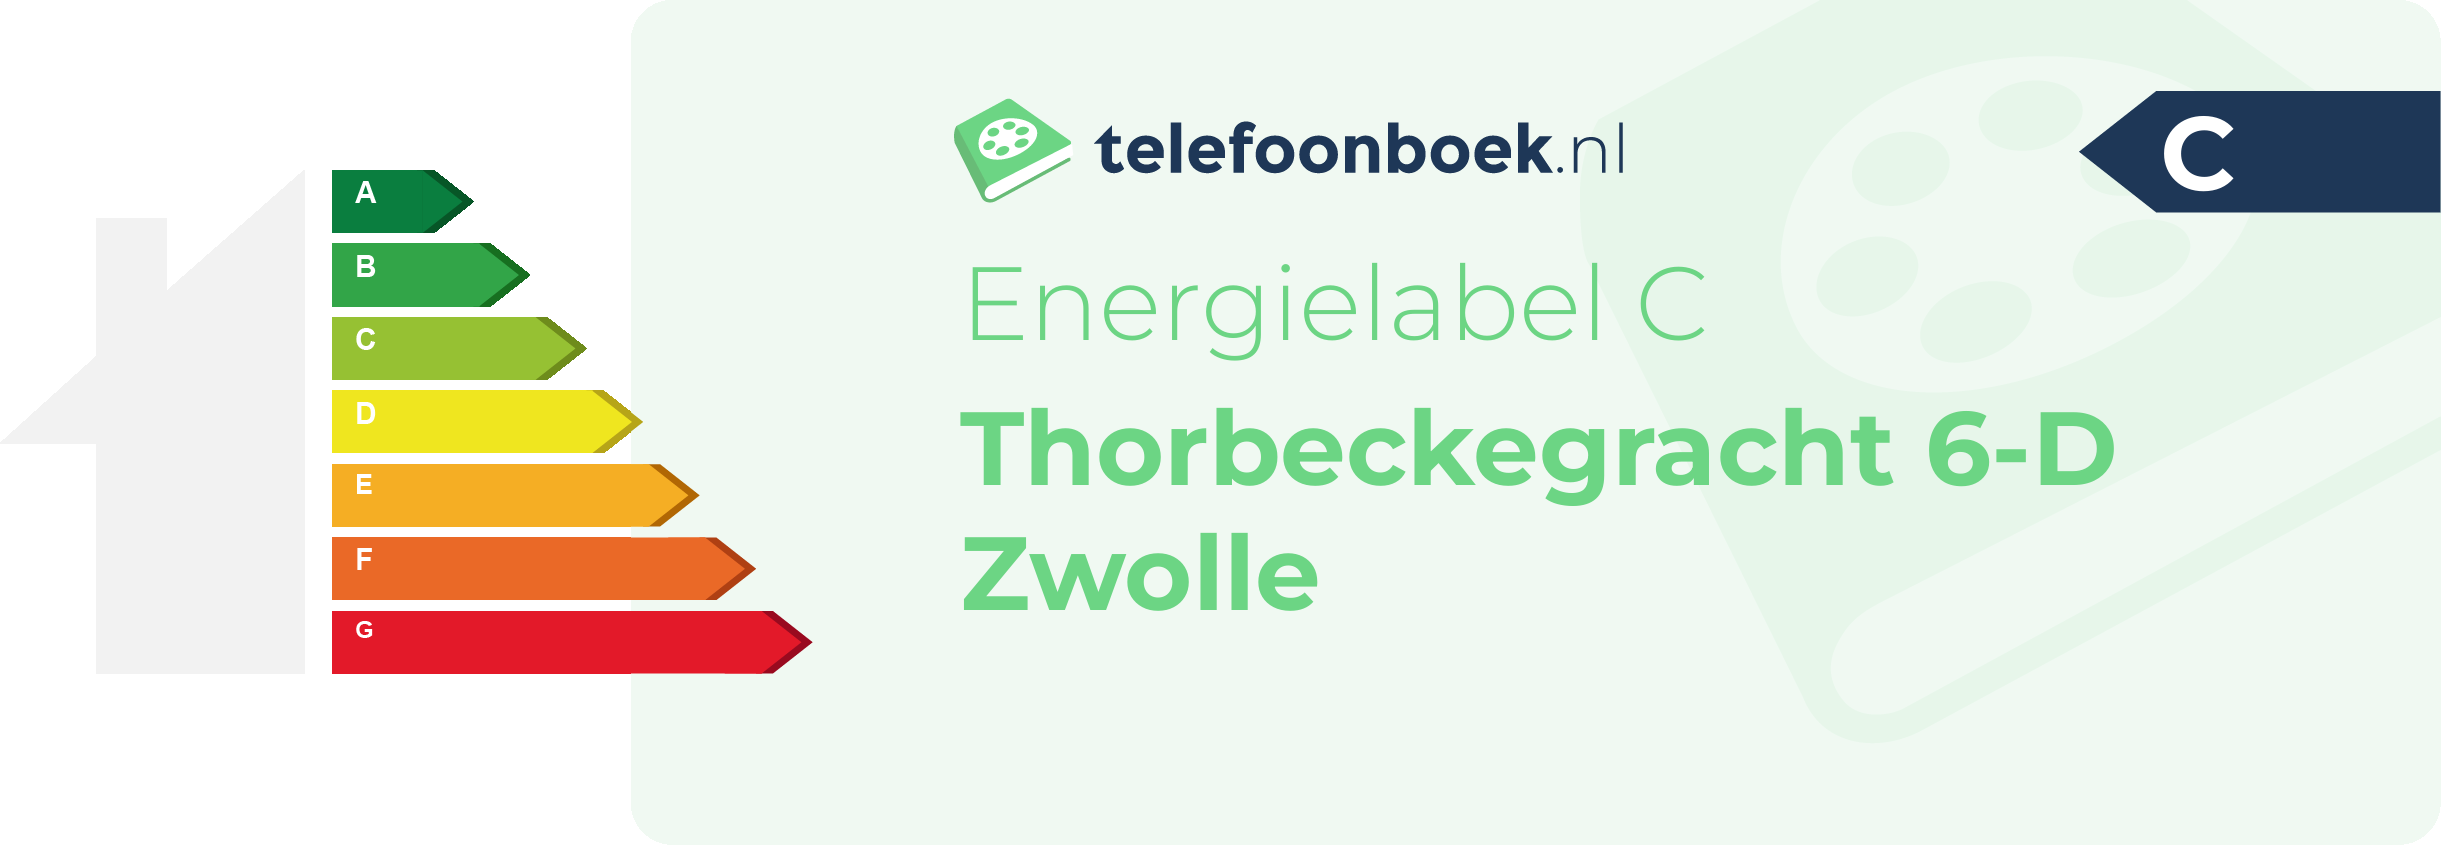 Energielabel Thorbeckegracht 6-D Zwolle